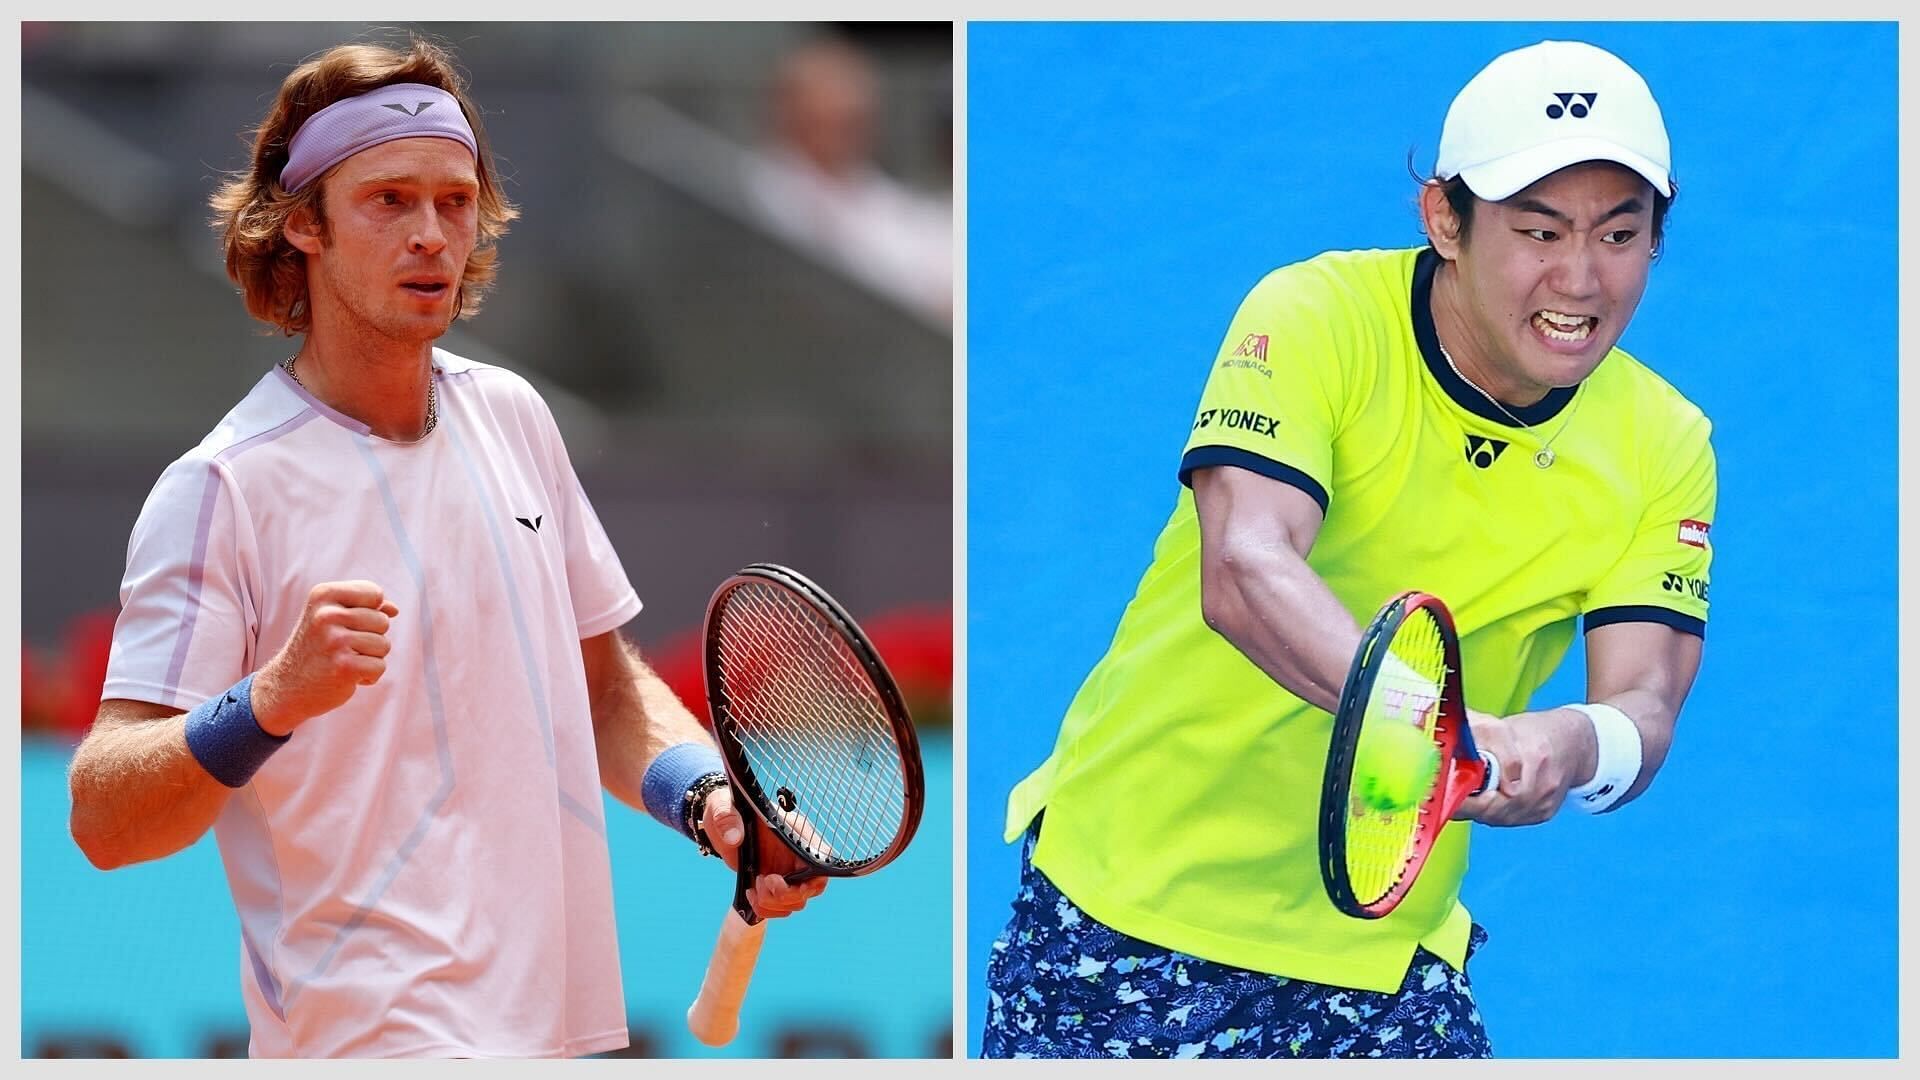 Rublev (left) takes on Nishioka for a place in the Madrid third round.